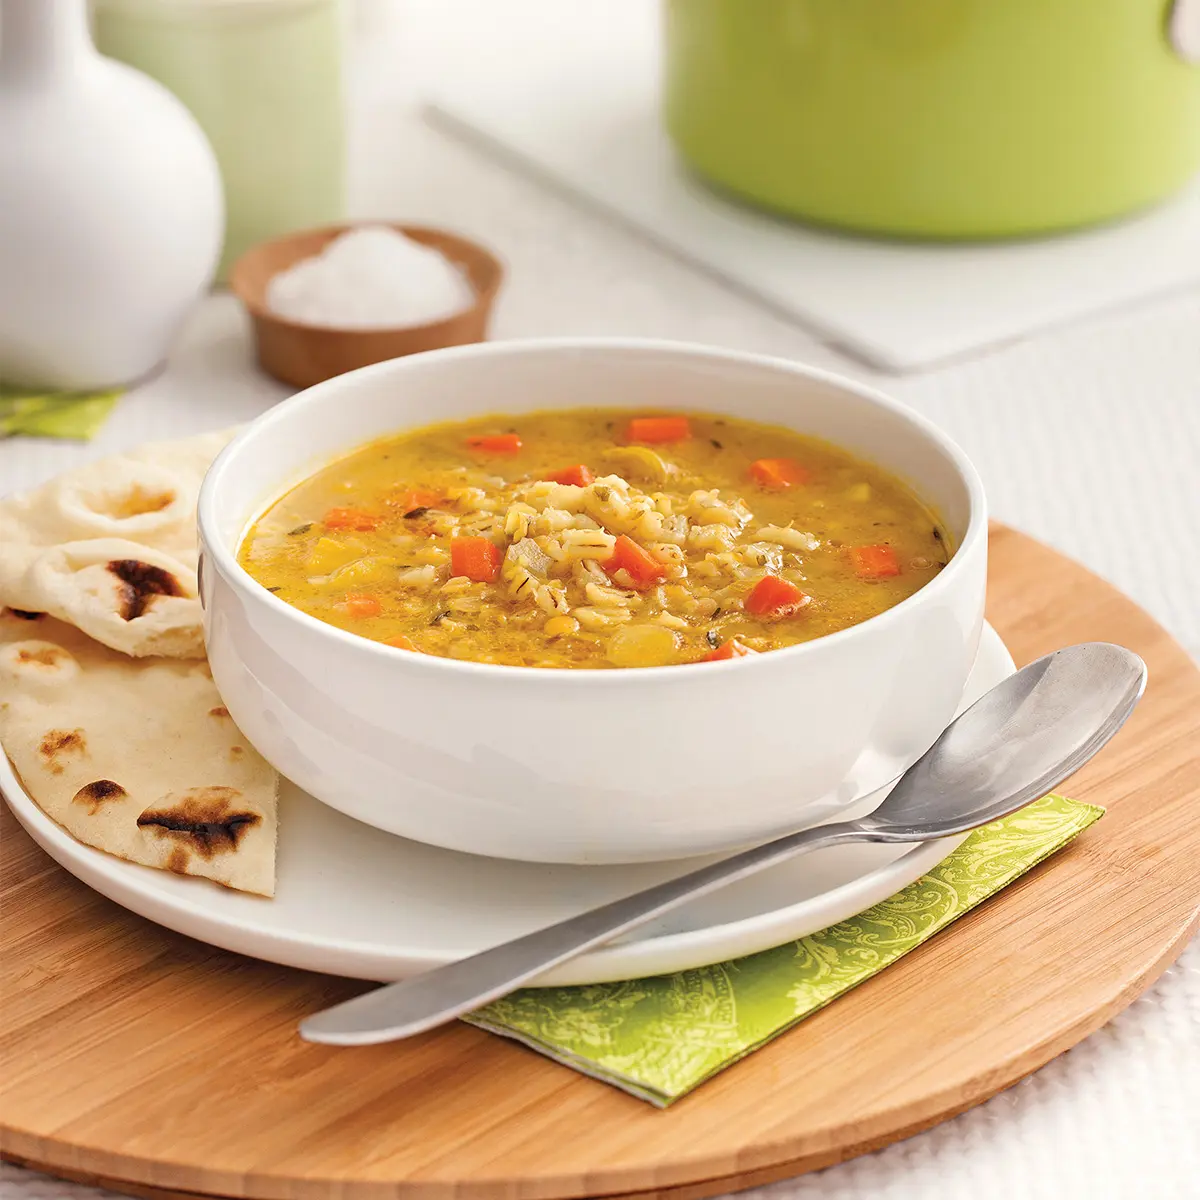 Indian-style barley and lentils soup